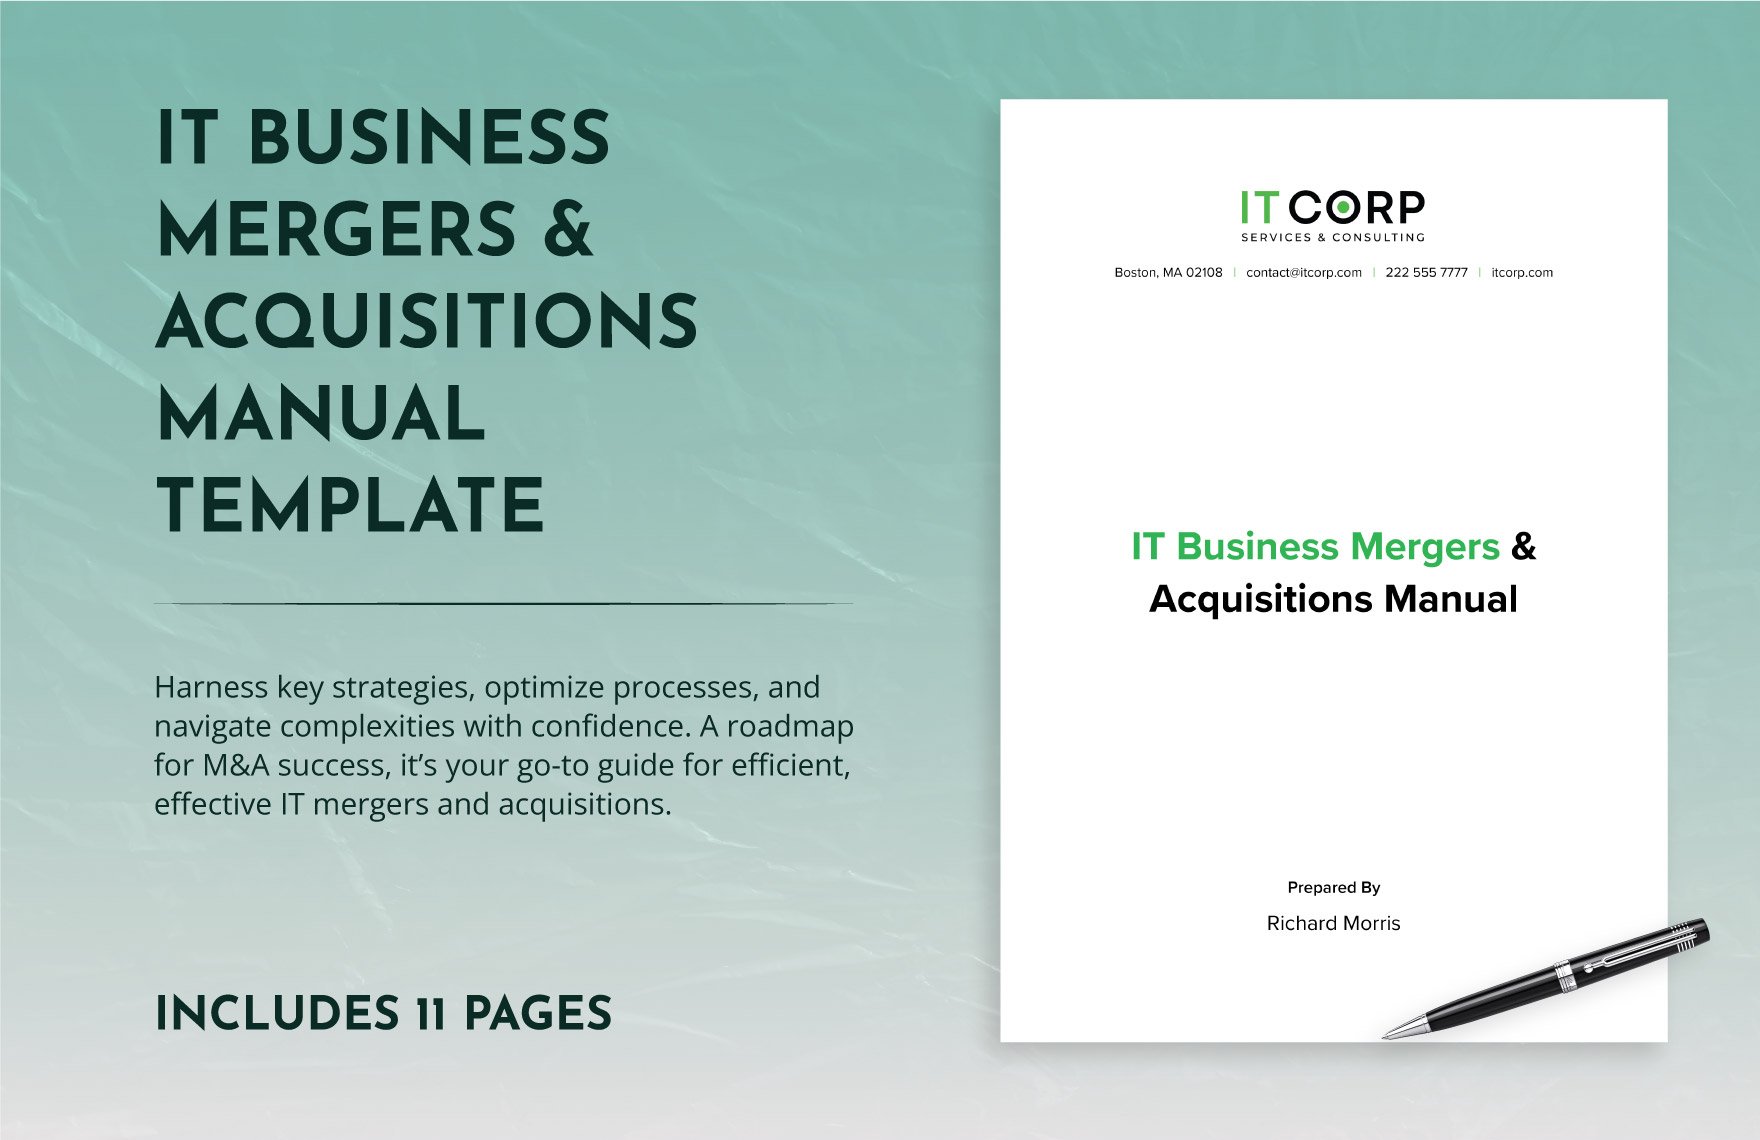 IT Business Mergers & Acquisitions Manual Template in Word, Google Docs, PDF